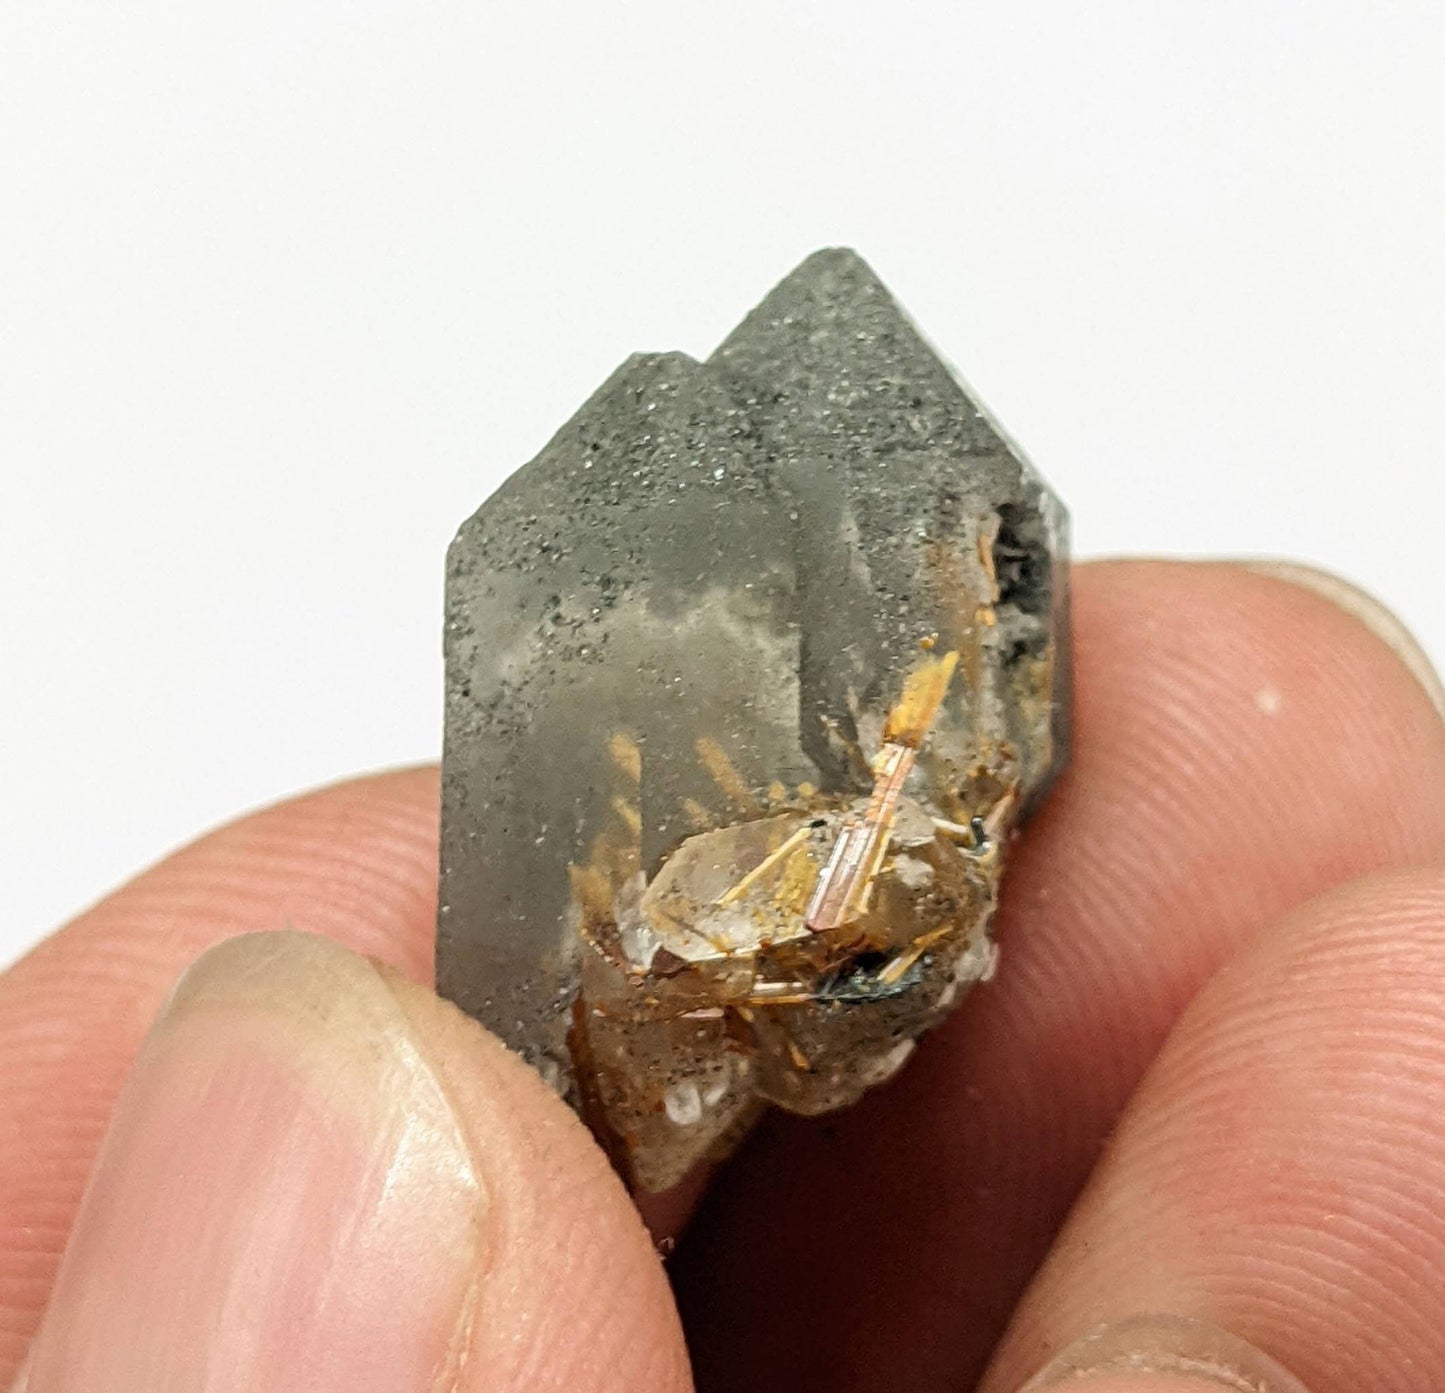 ARSAA GEMS AND MINERALSTwins Sagenite var Rutile included quartz crystal from KP Pakistan, 4.5 grams - Premium  from ARSAA GEMS AND MINERALS - Just $25.00! Shop now at ARSAA GEMS AND MINERALS